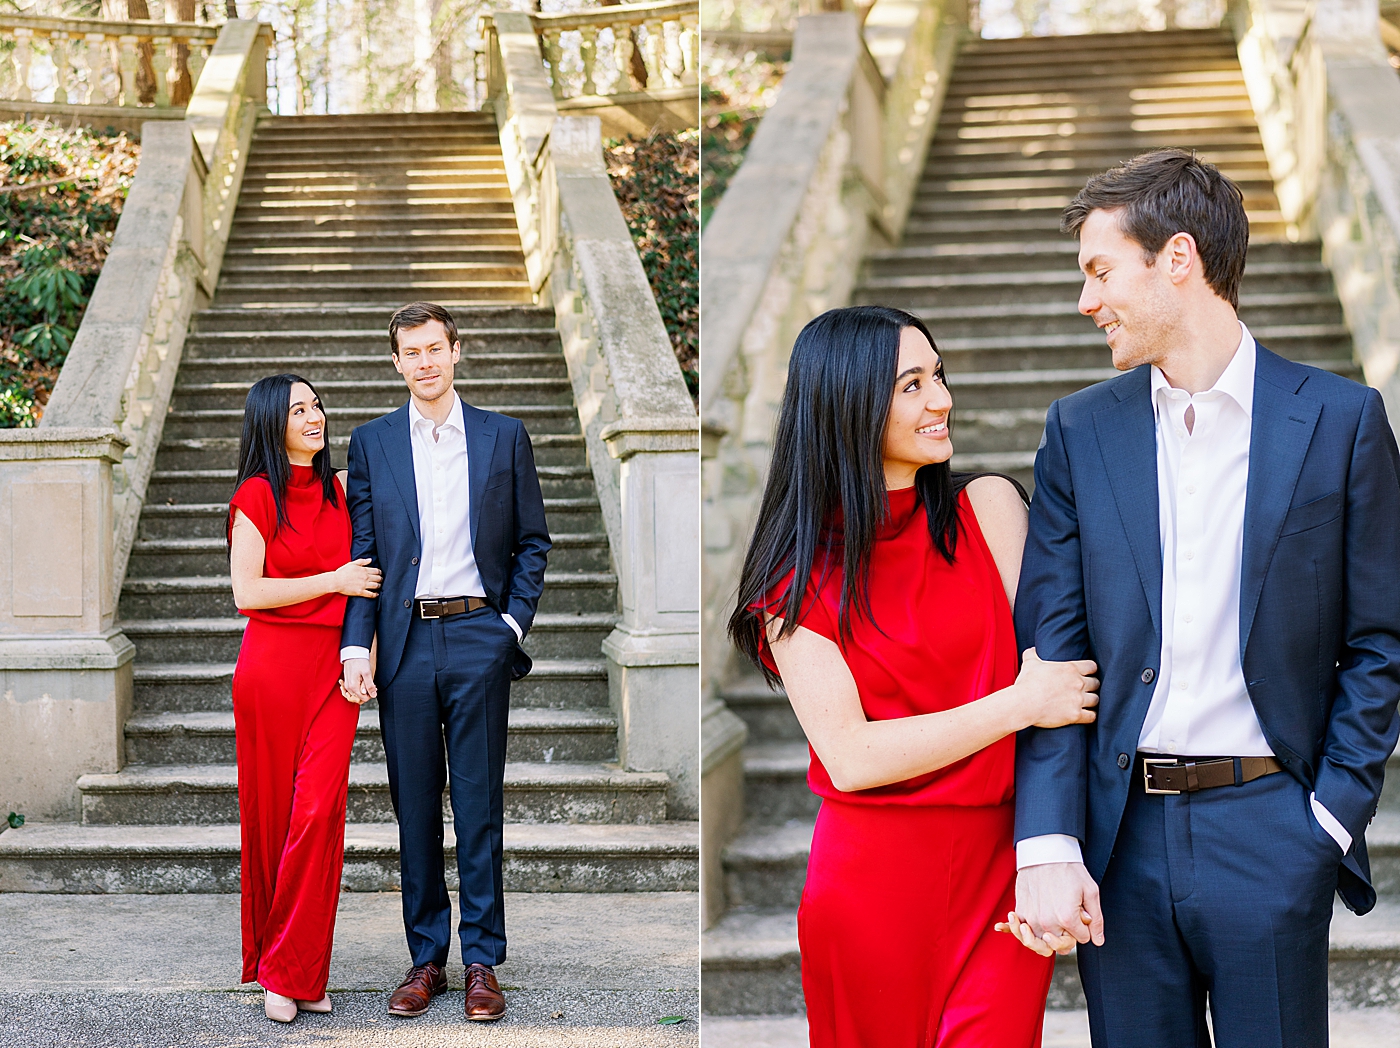 Couple in chic red and blue outfits posing in front of stairs | Image by Annie Laura Photo